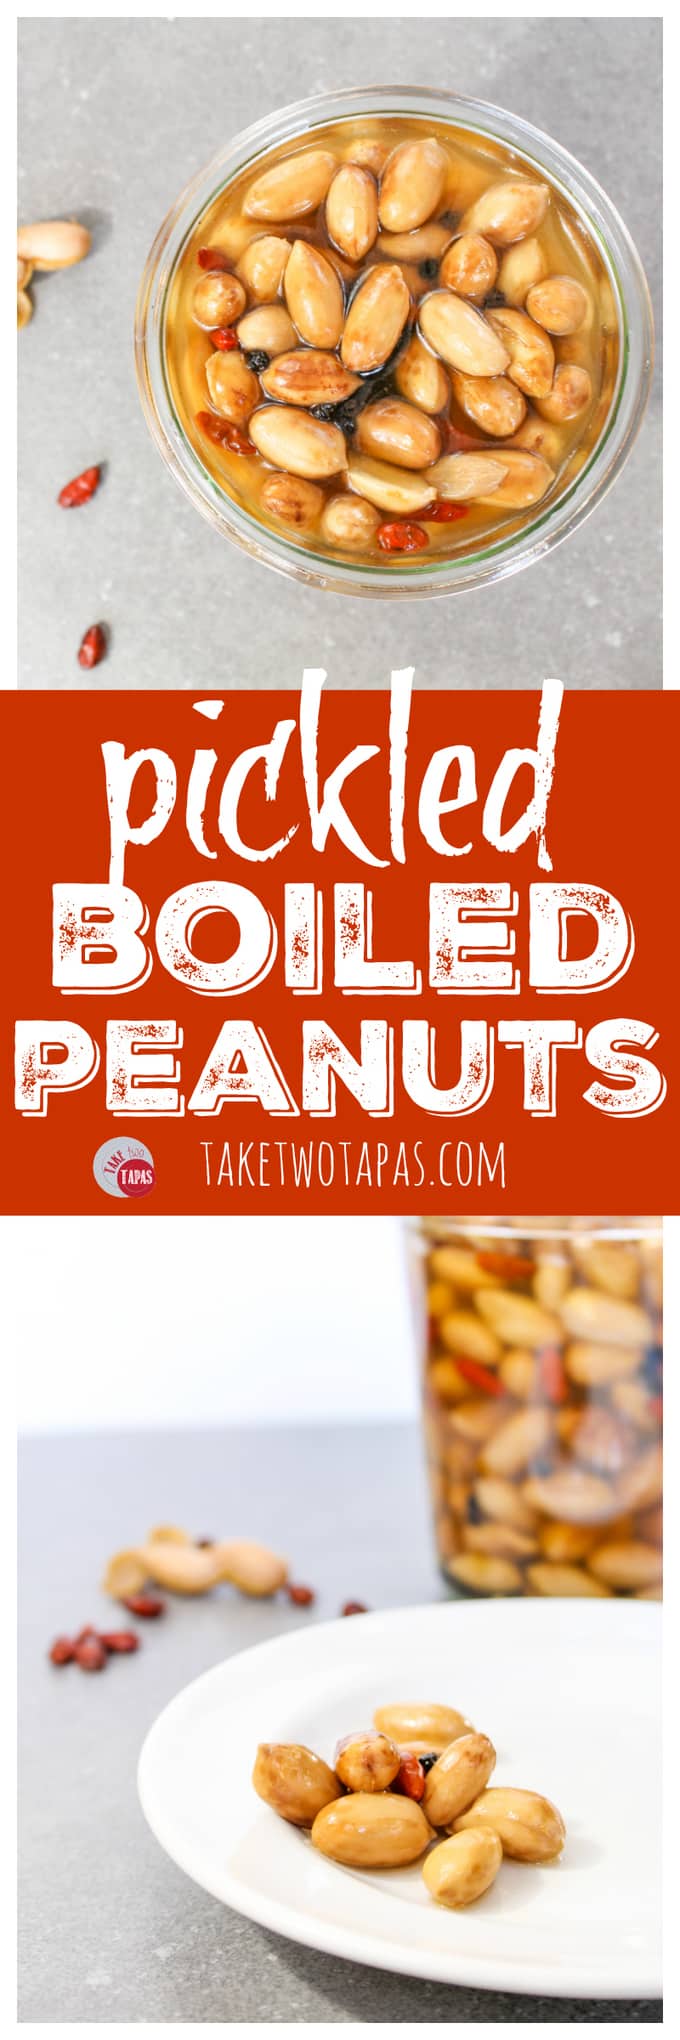 Pinterest double image with text "Pickled Boiled Peanuts"